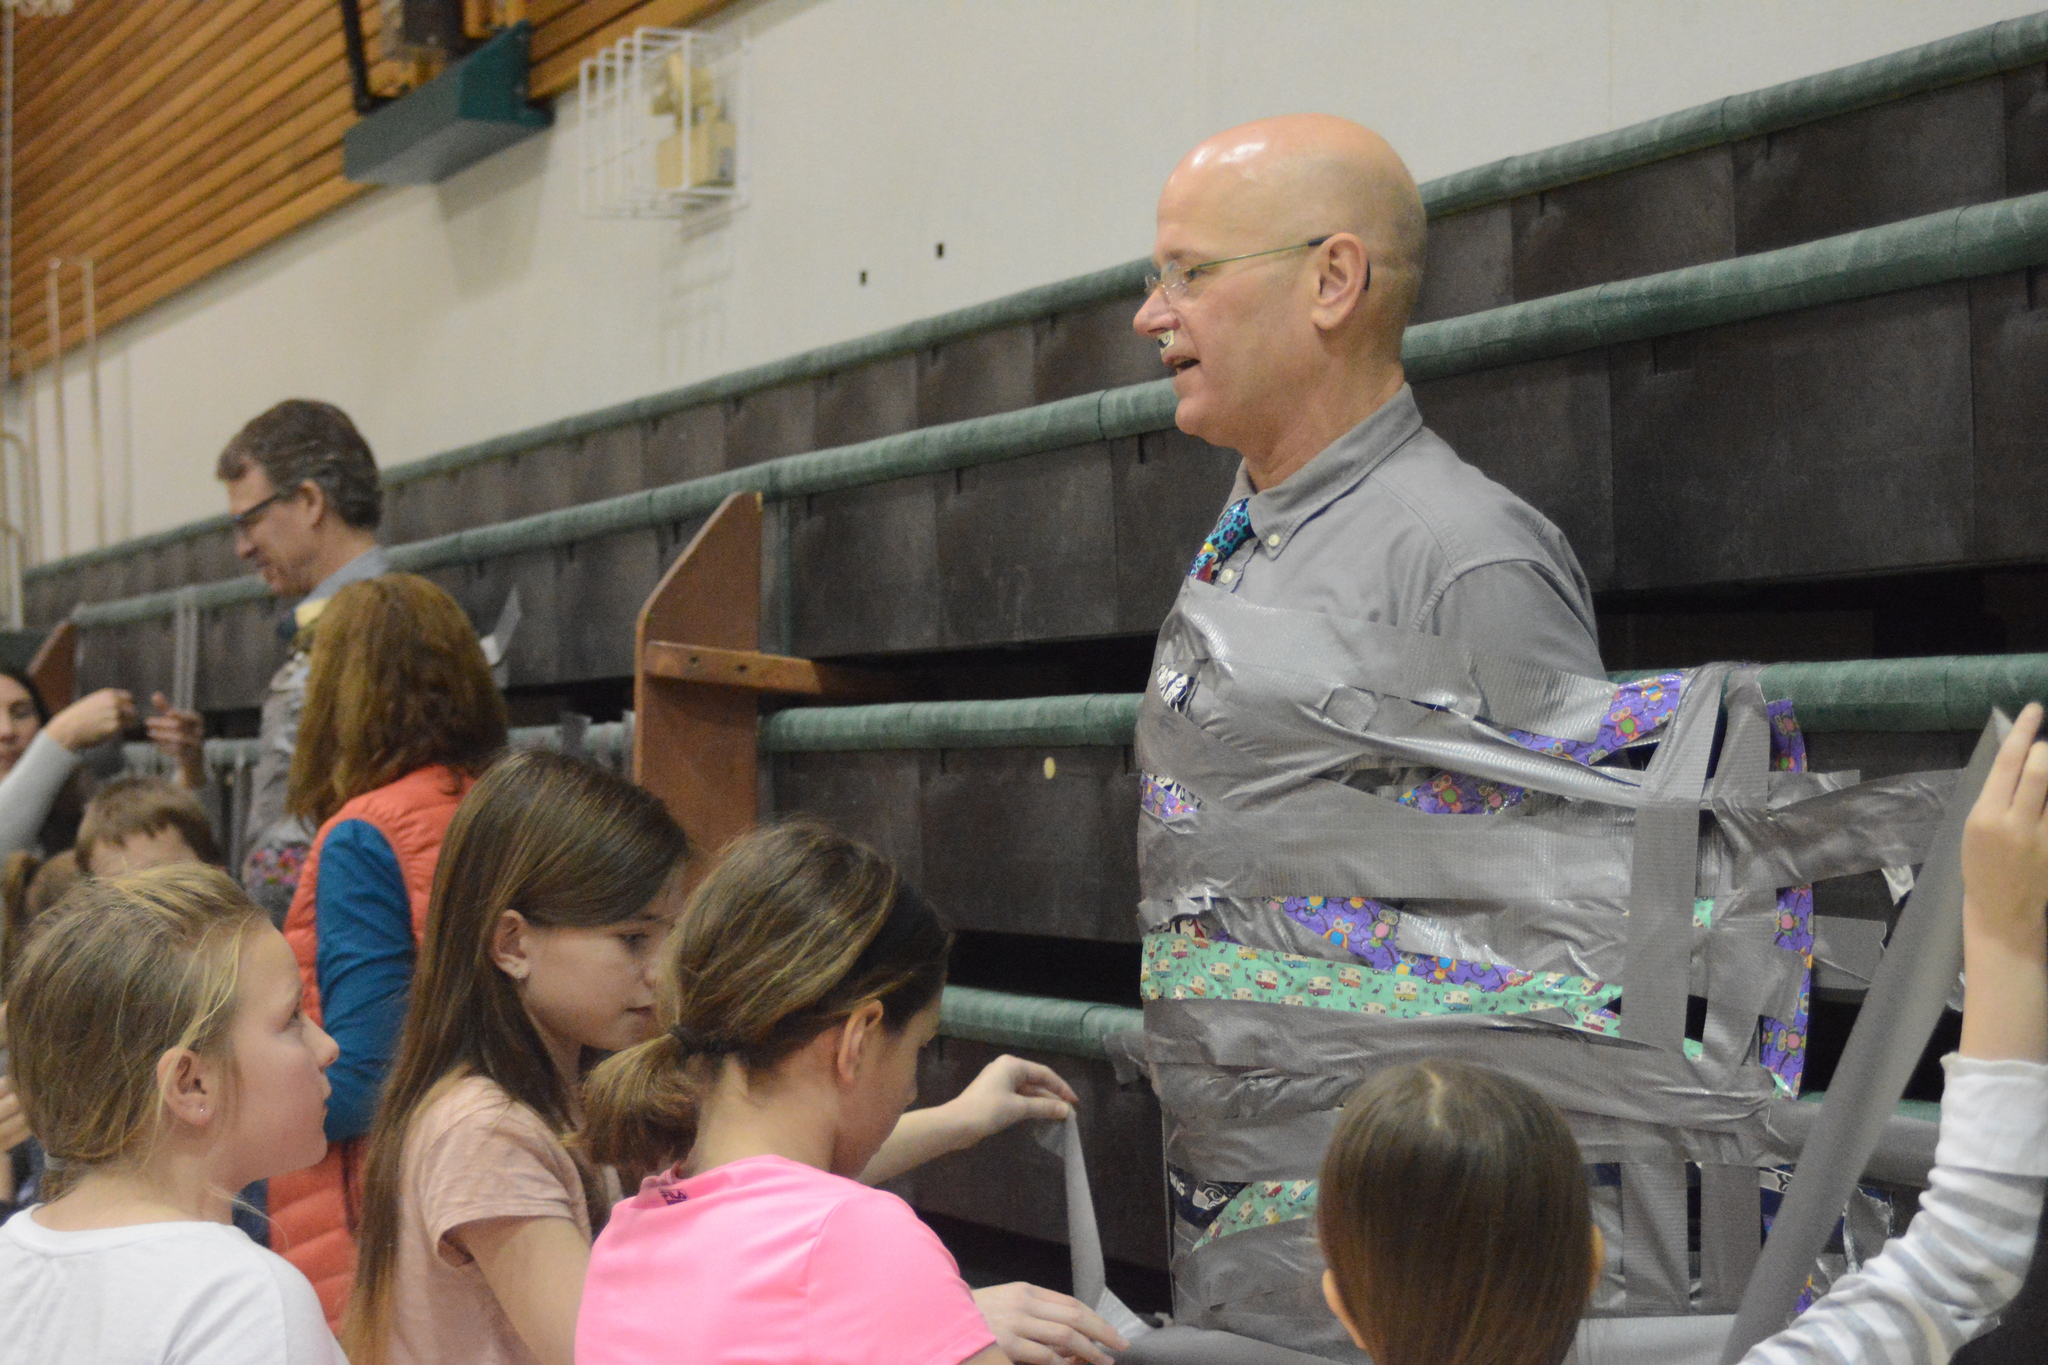 Students at West Homer Elementary School and Fireweed Academy duct tape their principals to the wall in the mutlipurpose room. At left is West Homer Elementary Principal Eric Waltenbaugh and at right is Fireweed Academy Principal Todd Hindman. The students got the reward of plastering duct tape across the principals for filling up a jar with tokens handed out when a student showed good behavior like being respectful and responsible.